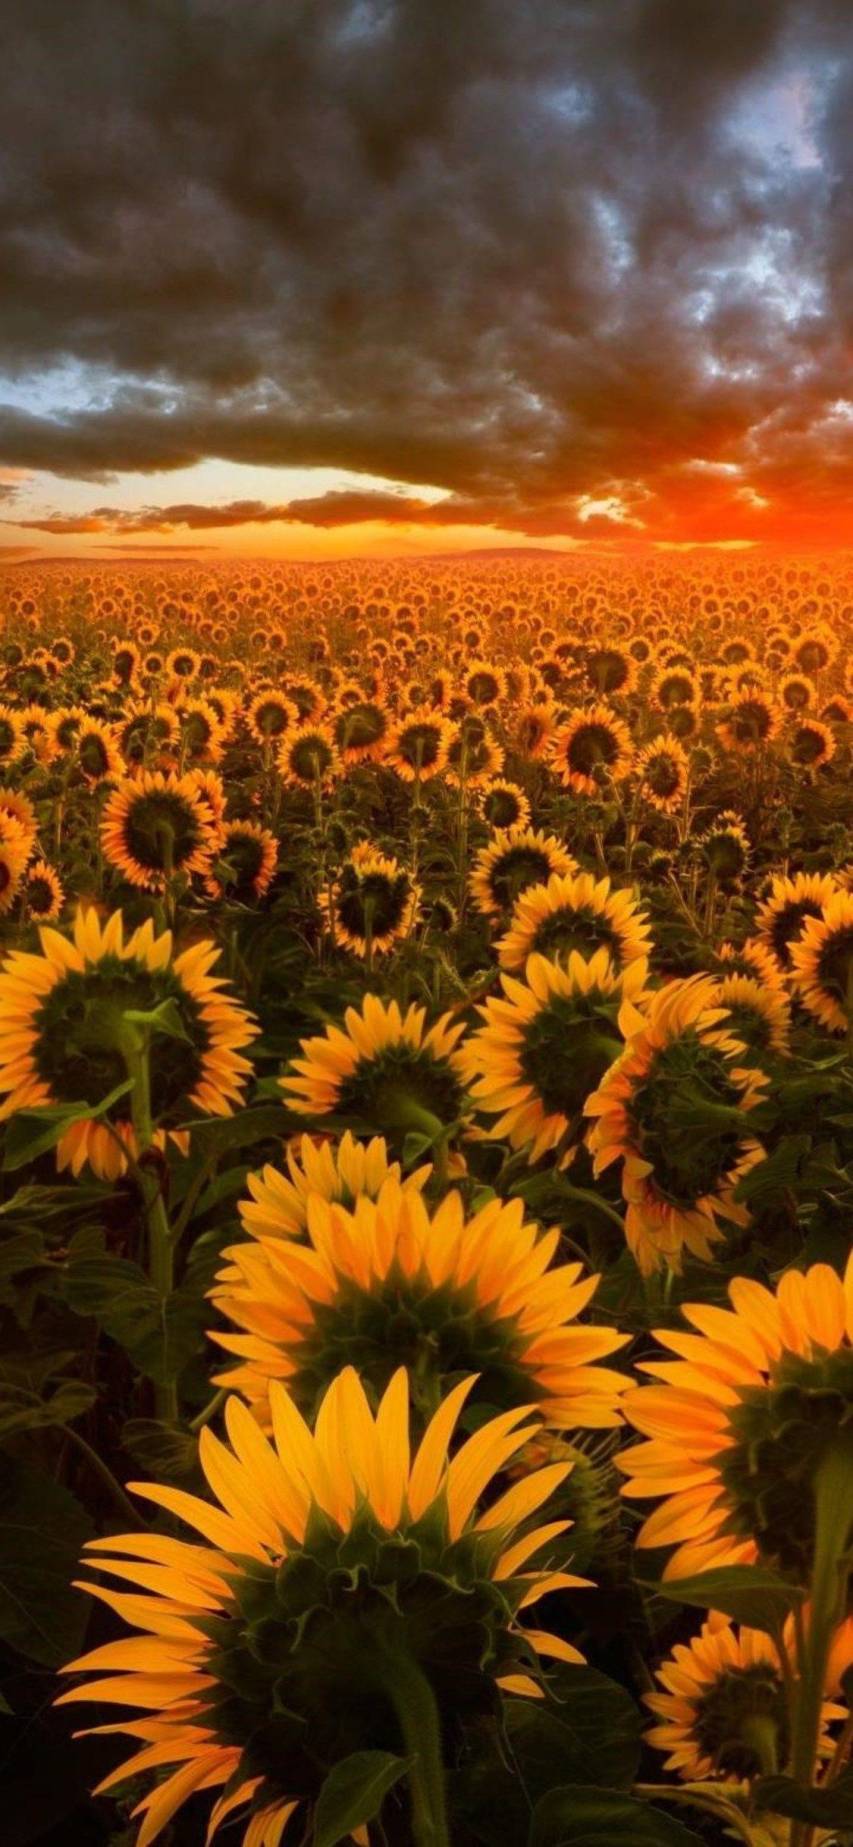 391745 sunset sunflowers flower field scenery nature 4k pc  Rare  Gallery HD Wallpapers